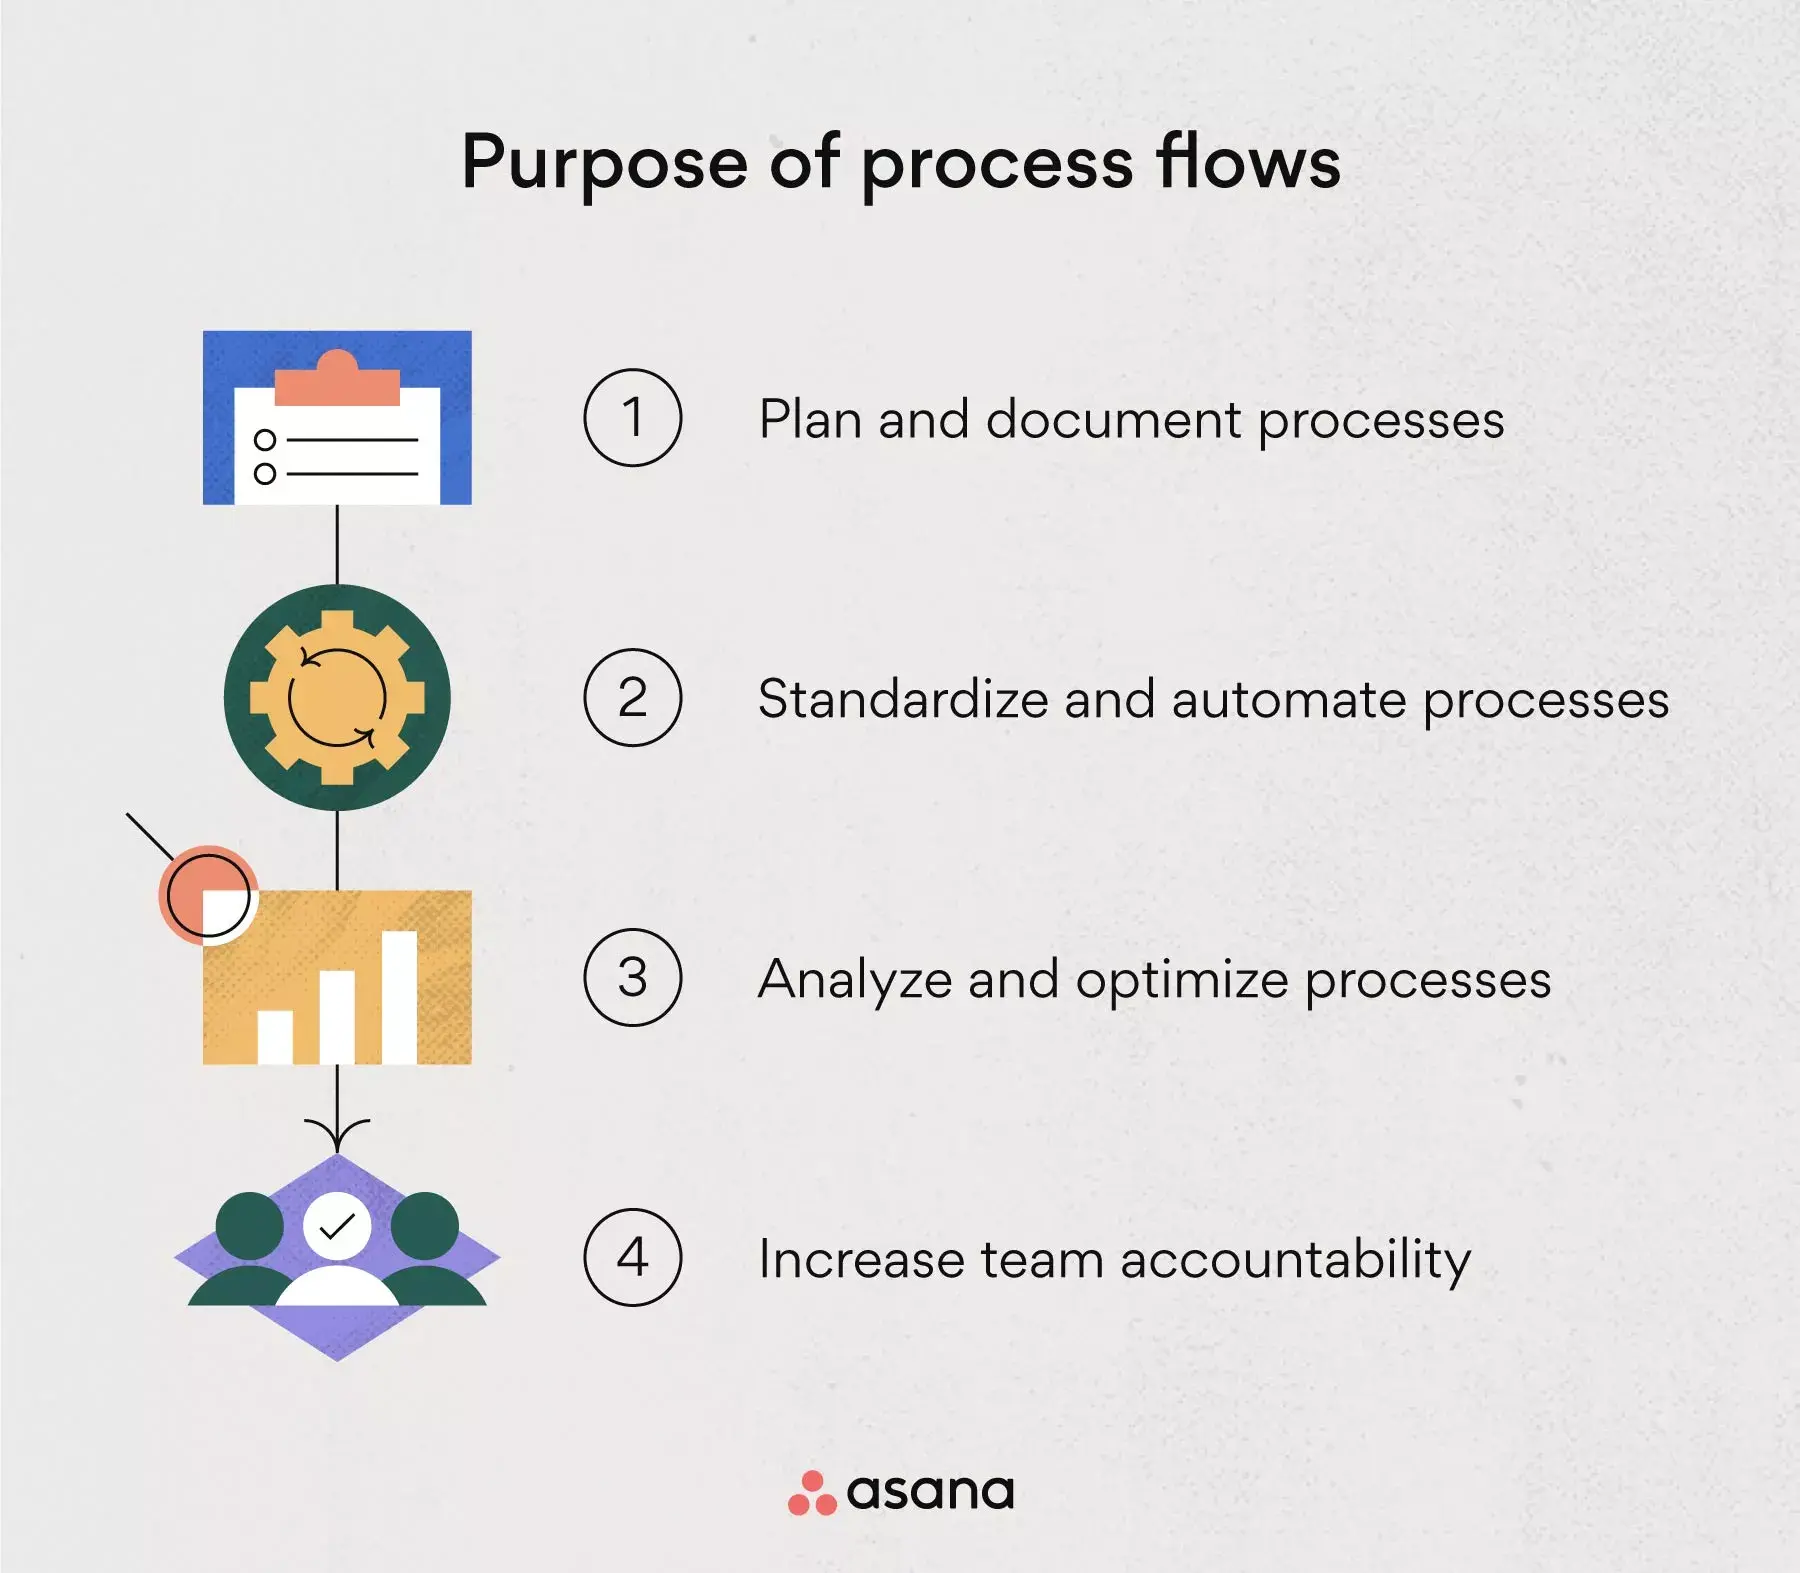 What is a process flow used for?